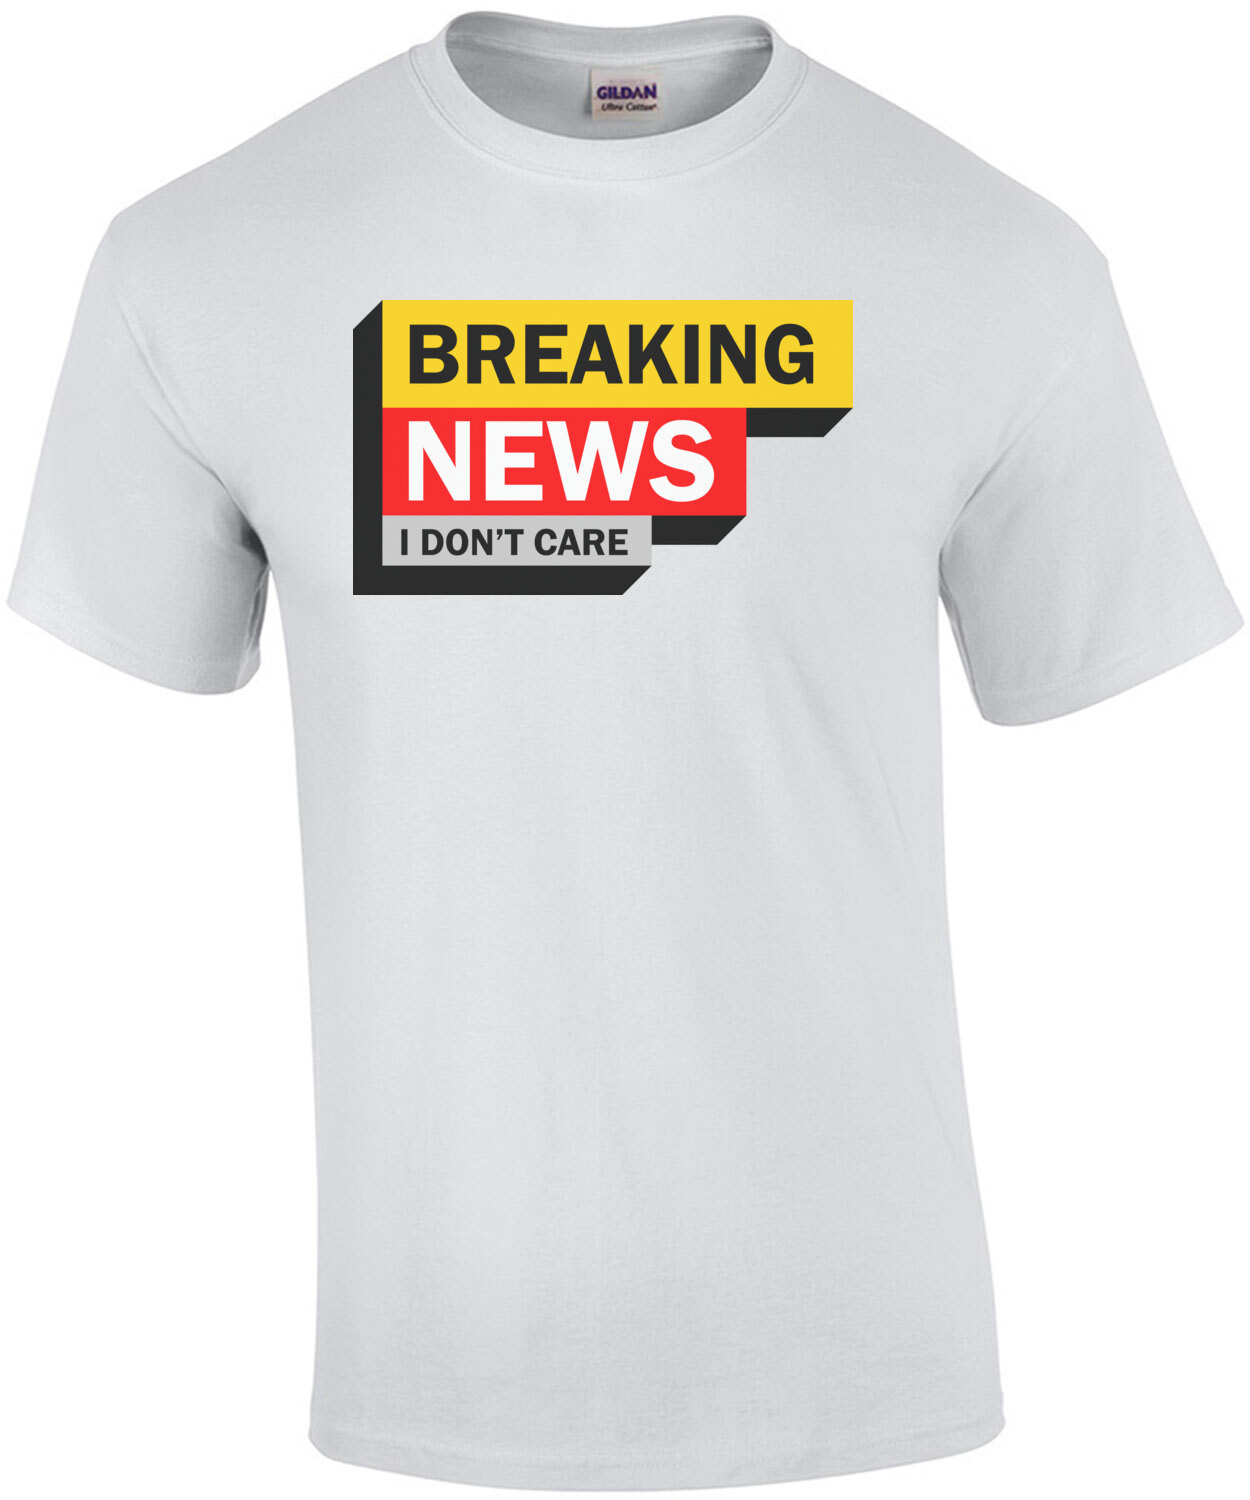 Breaking News - I Don't Care - Sarcastic T-Shirt